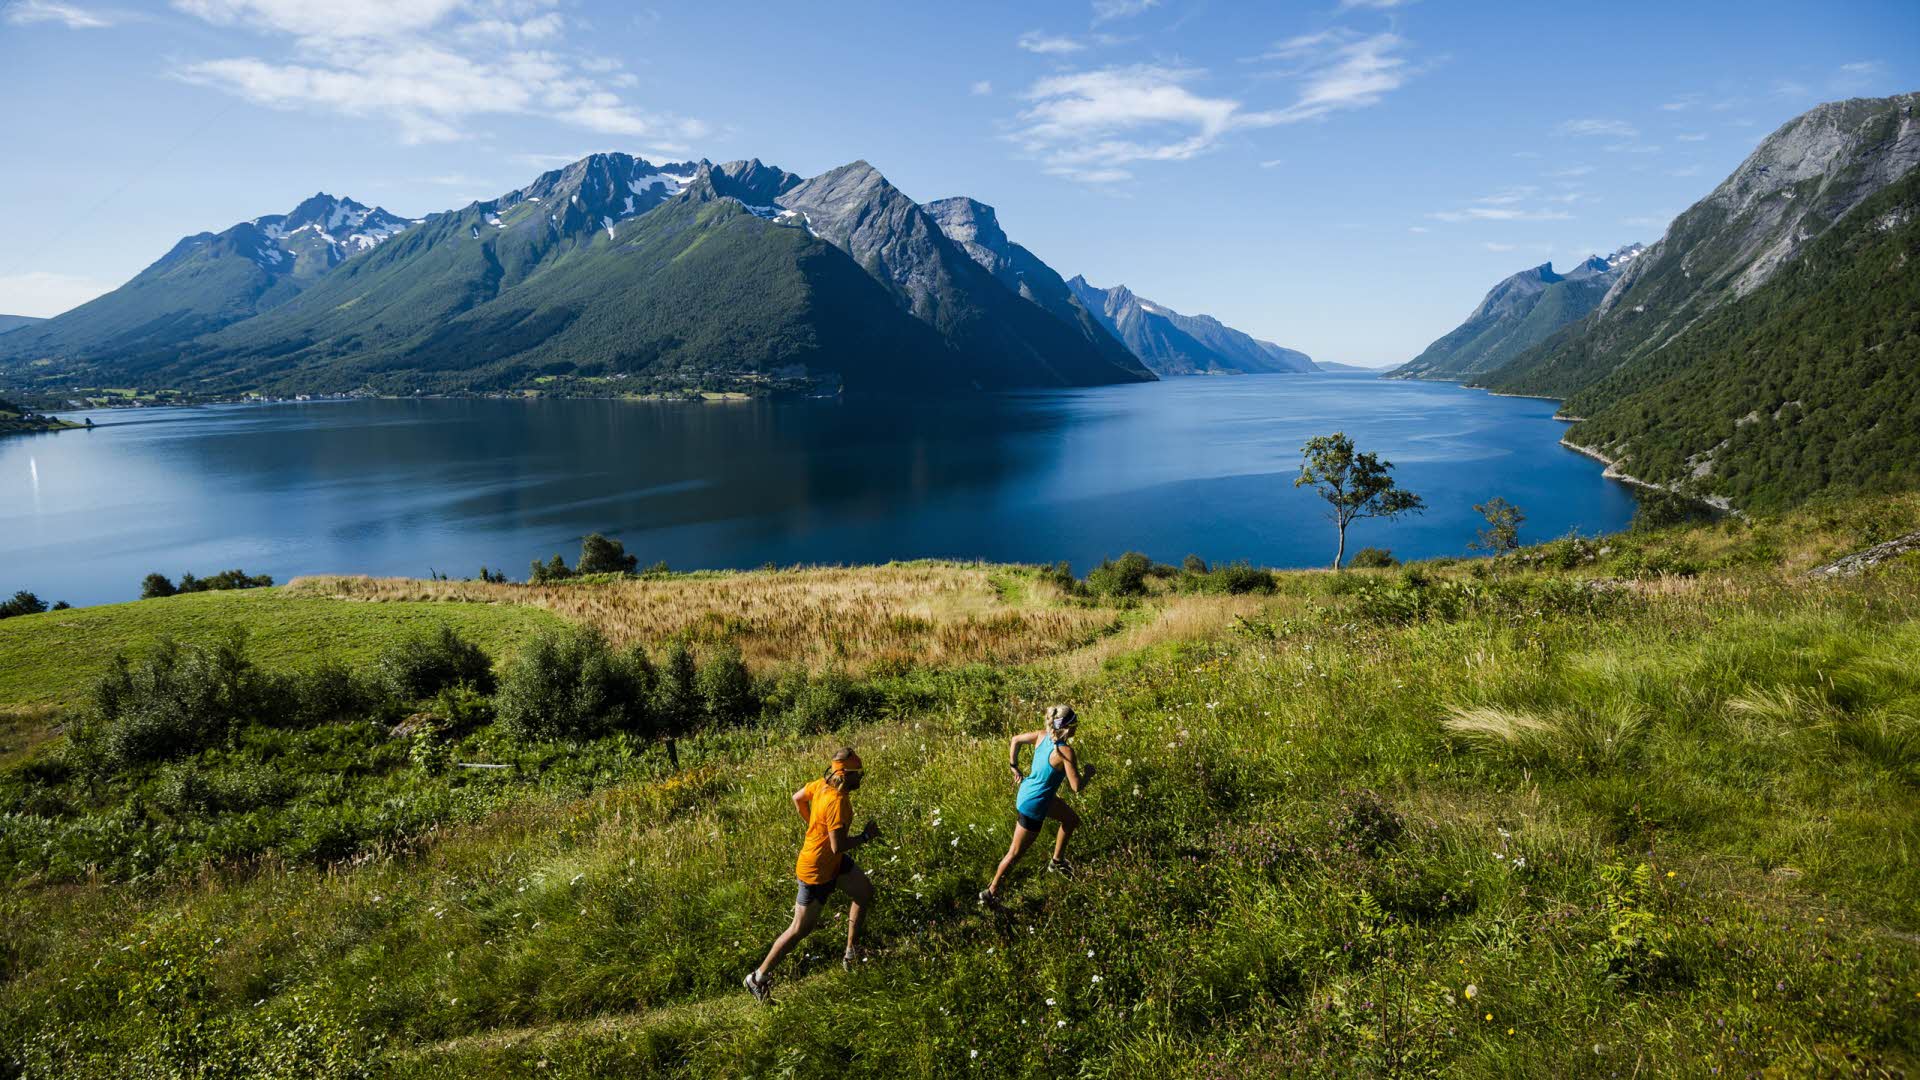 2 people in summer jogging by the hjorondfjord dramatic mountains in background